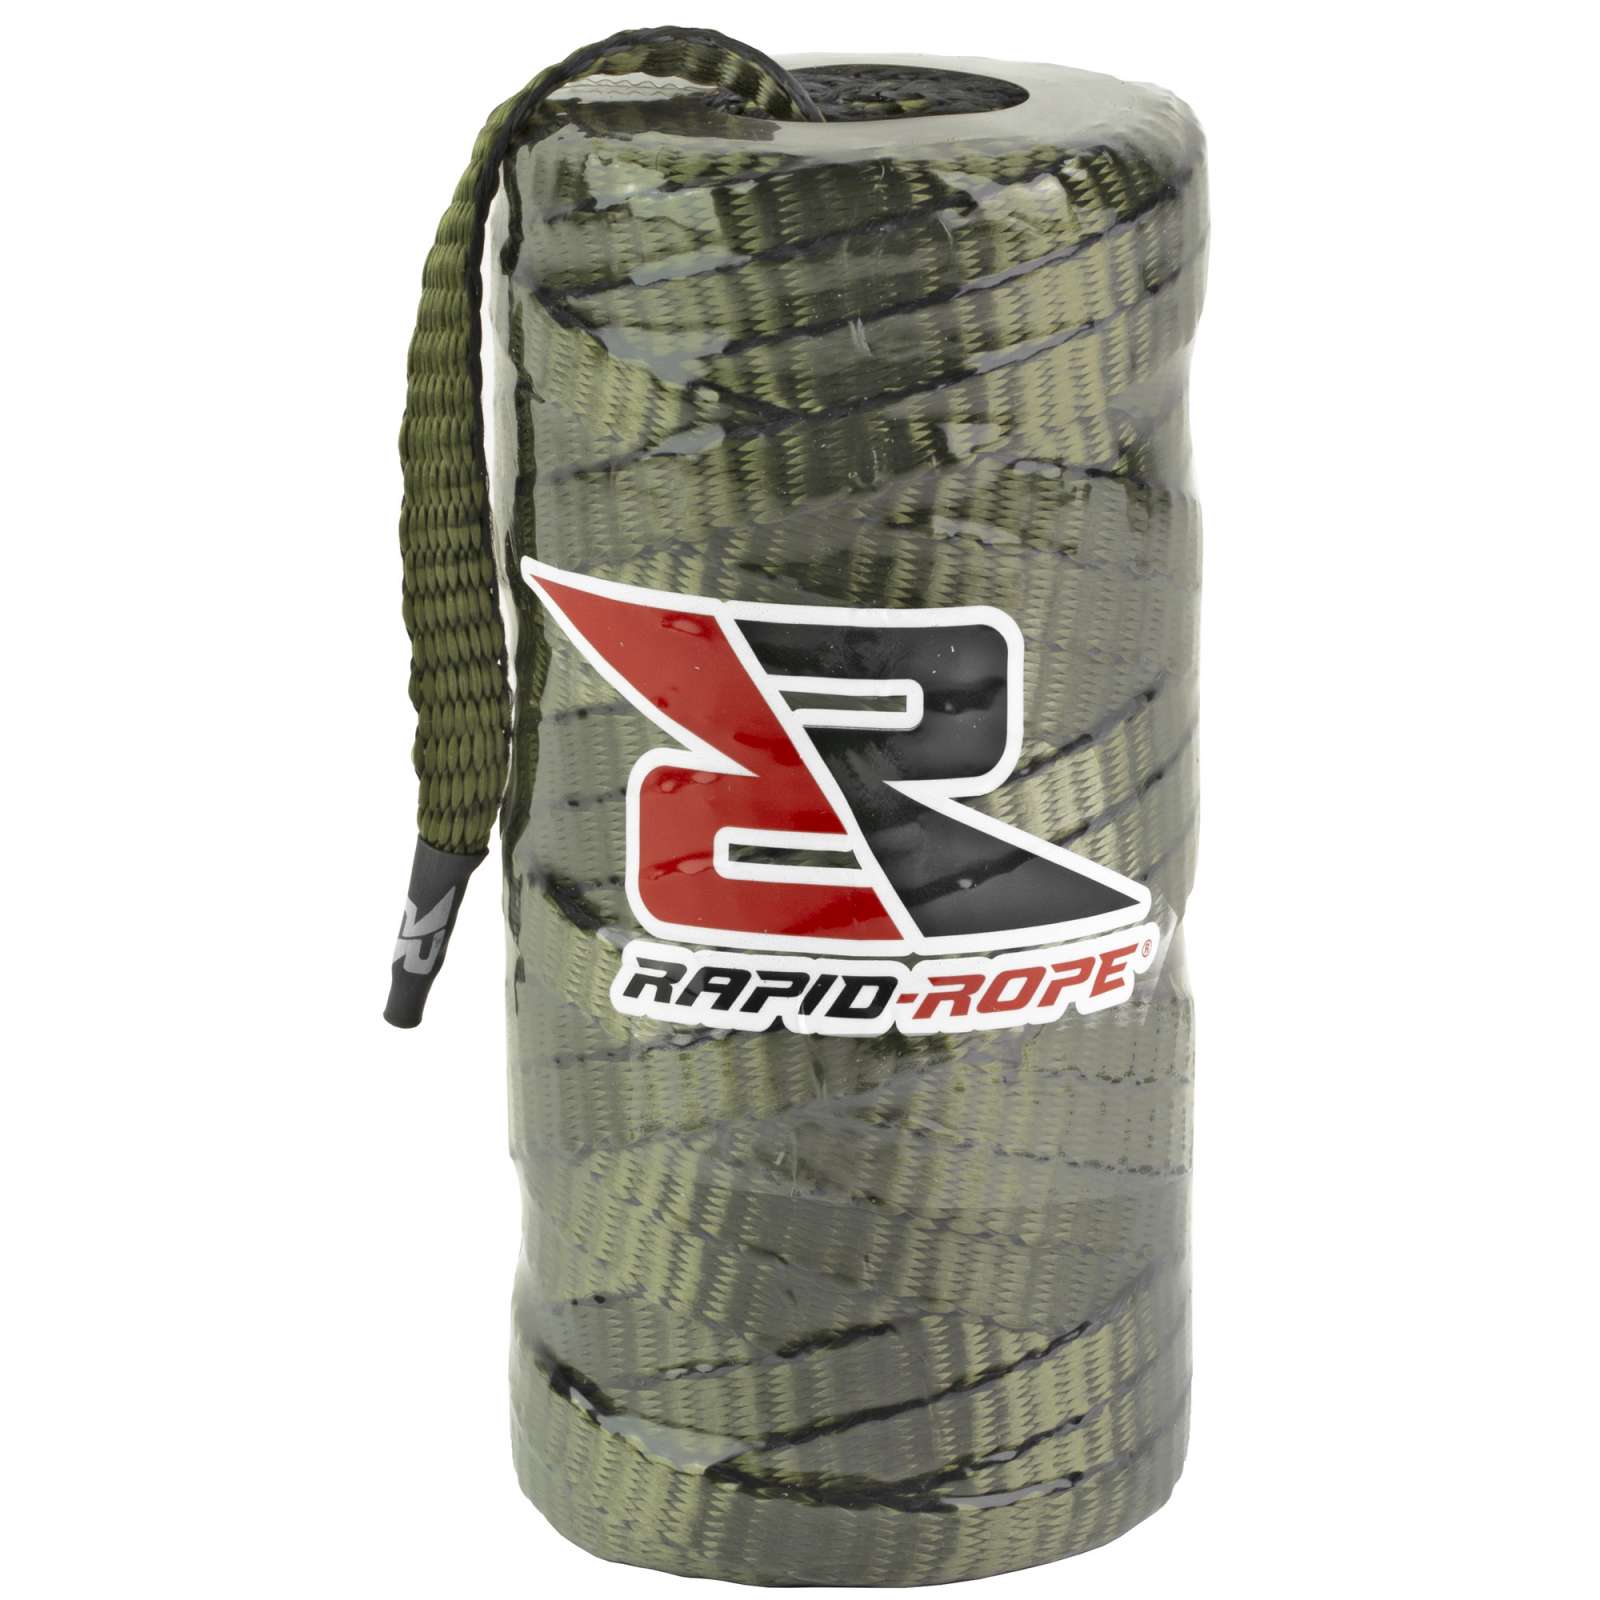 Rapid Rope 120' Rope Canister with Refill